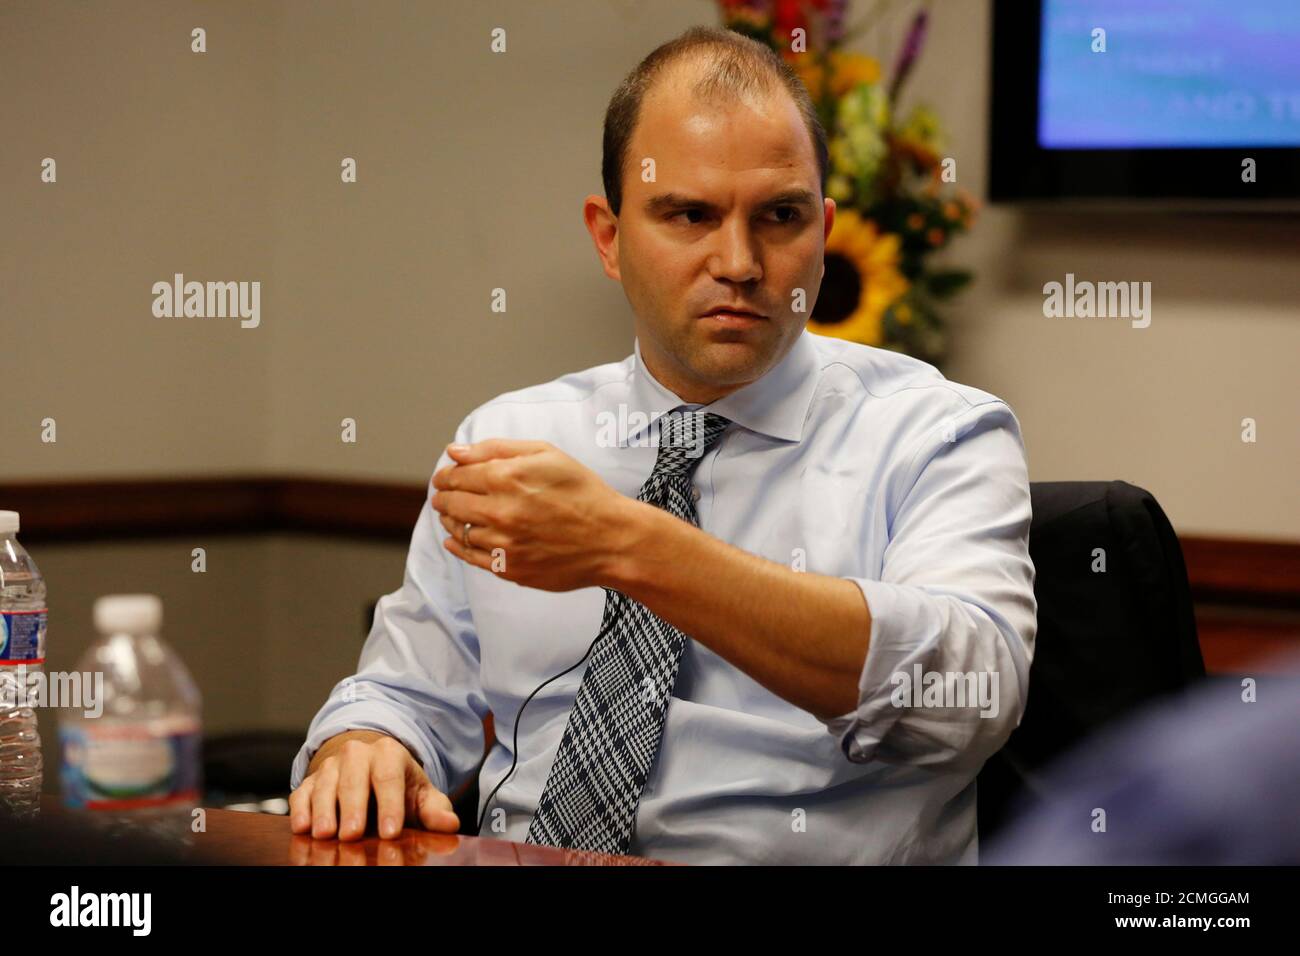 Ben Rhodes, assistant to the President and Deputy National Security Advisor for Strategic Communications at the White House, answers a question during the Reuters Washington Summit in Washington, October 24, 2013.  REUTERS/Jim Bourg   (UNITED STATES - Tags: POLITICS BUSINESS) Stock Photo